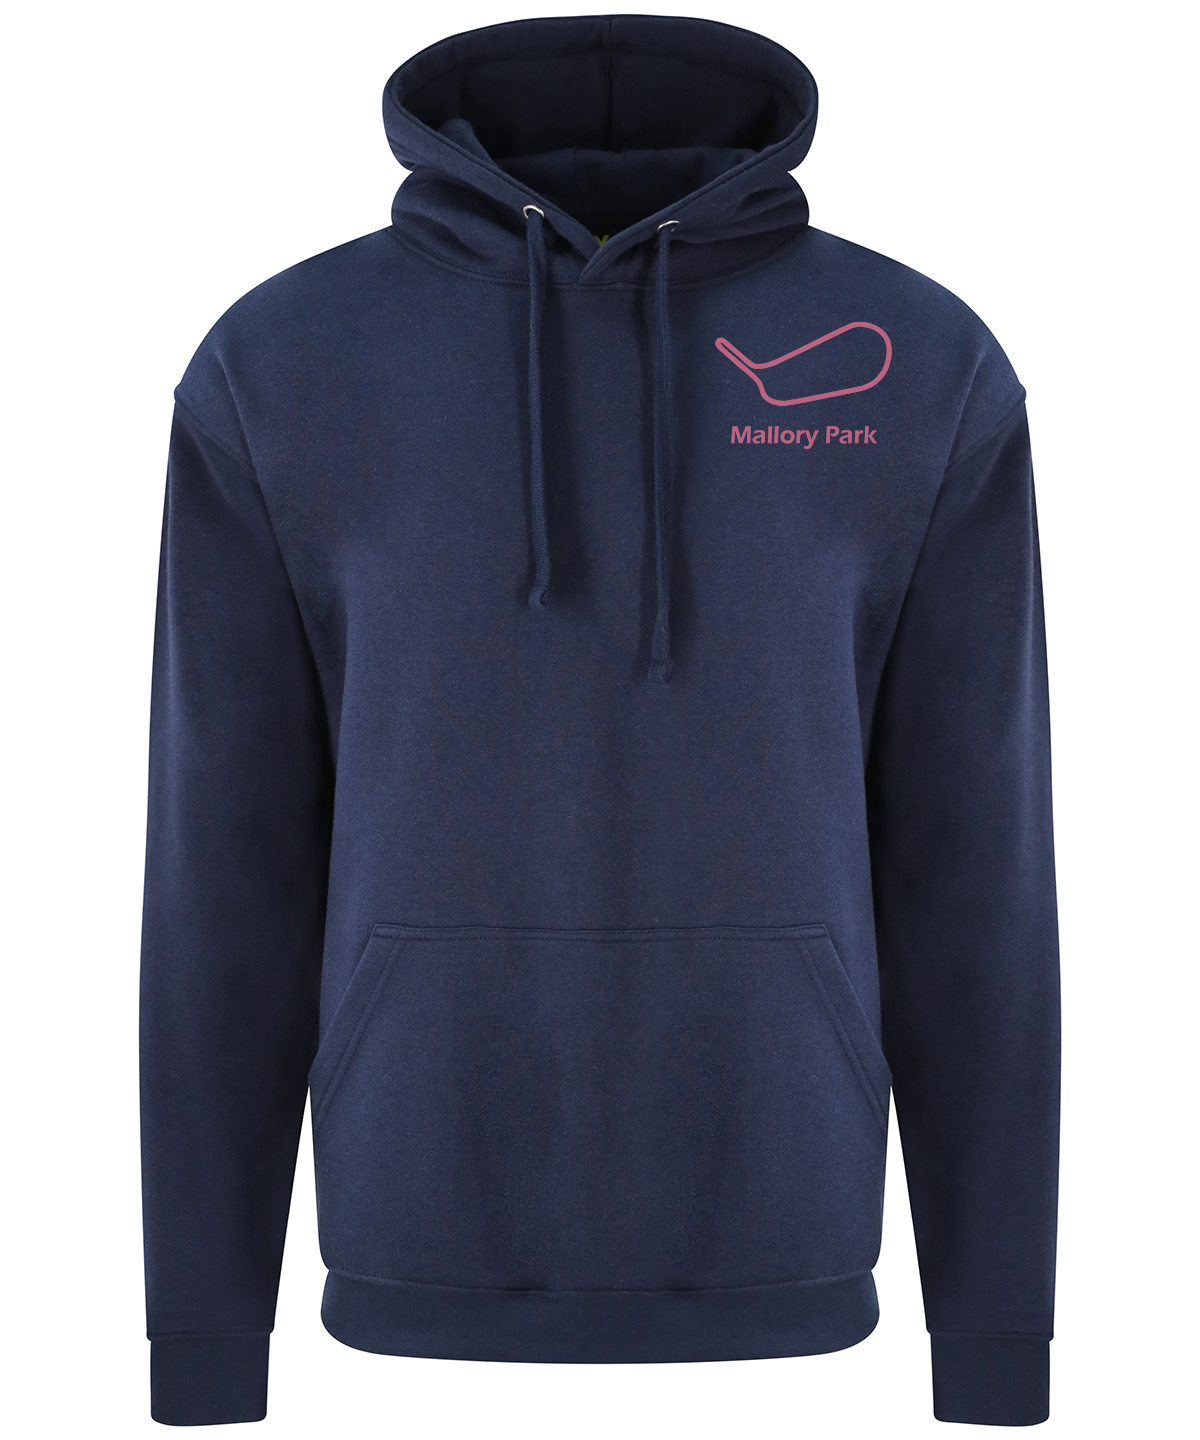 Mallory Park Hoodie